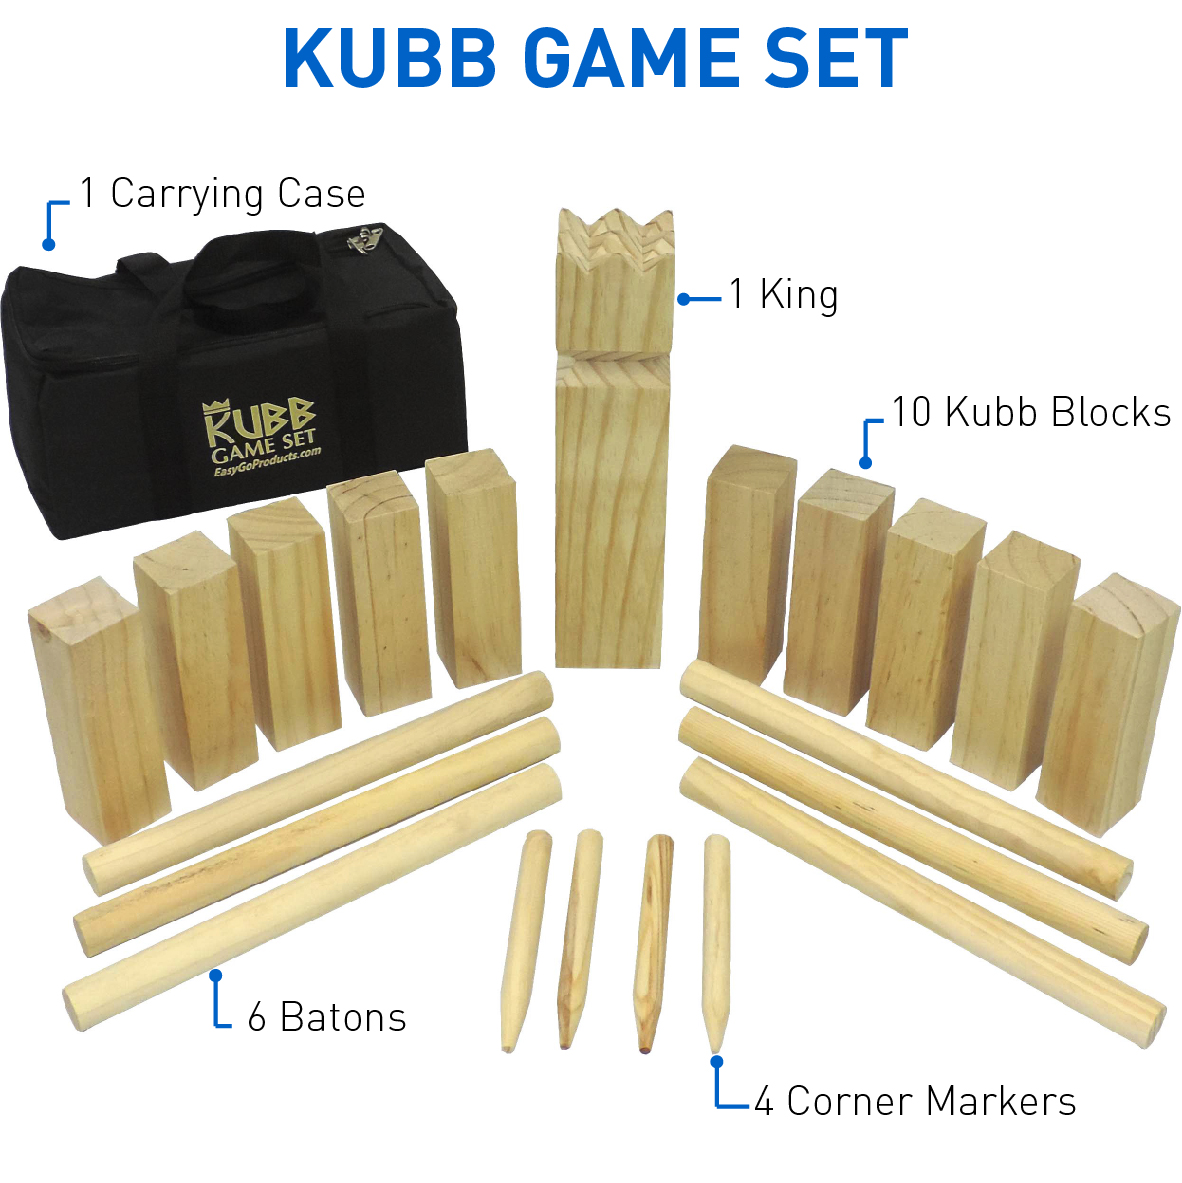 Kubb The Viking Wooden Outdoor Lawn Game  1 King, 10 Kubb Blocks, 6 Long Batons, 4 Corner Markers & Carrying Bag - image 1 of 4